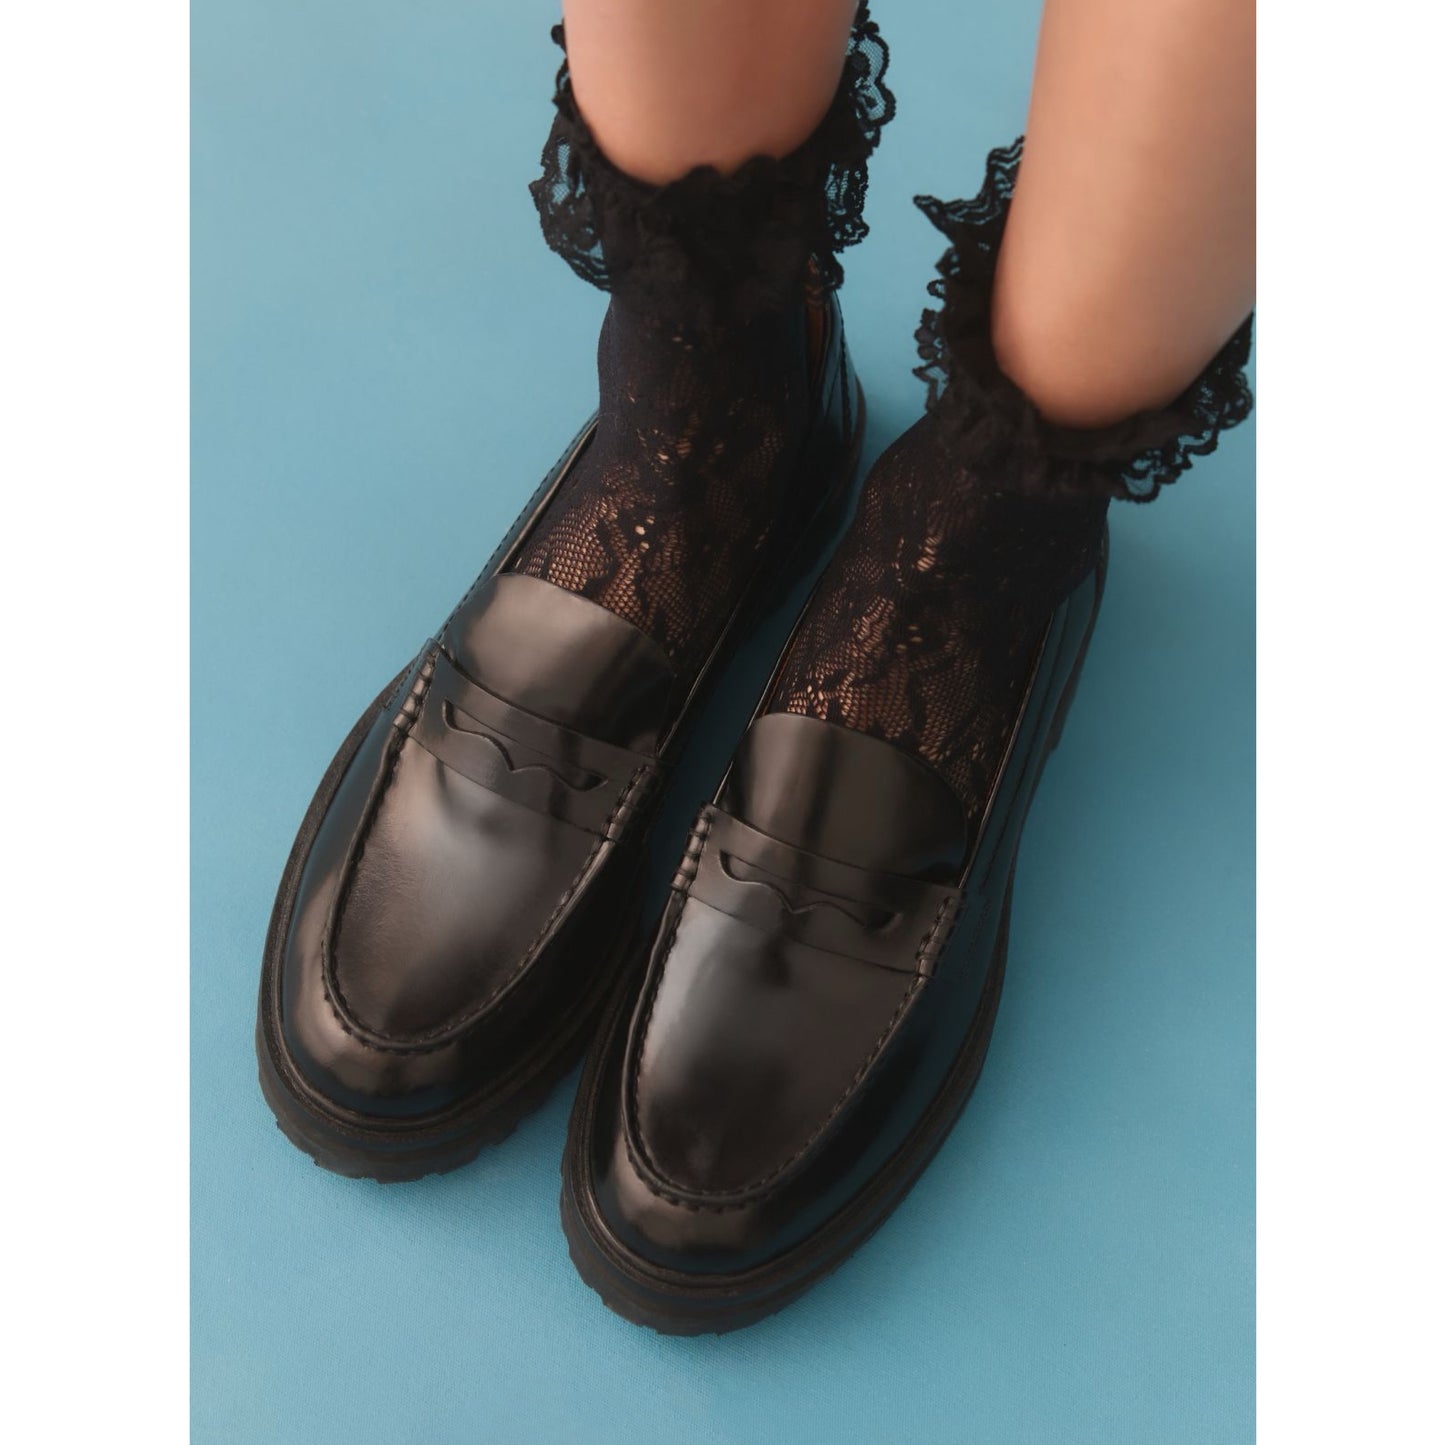 Reformation Leather Loafers